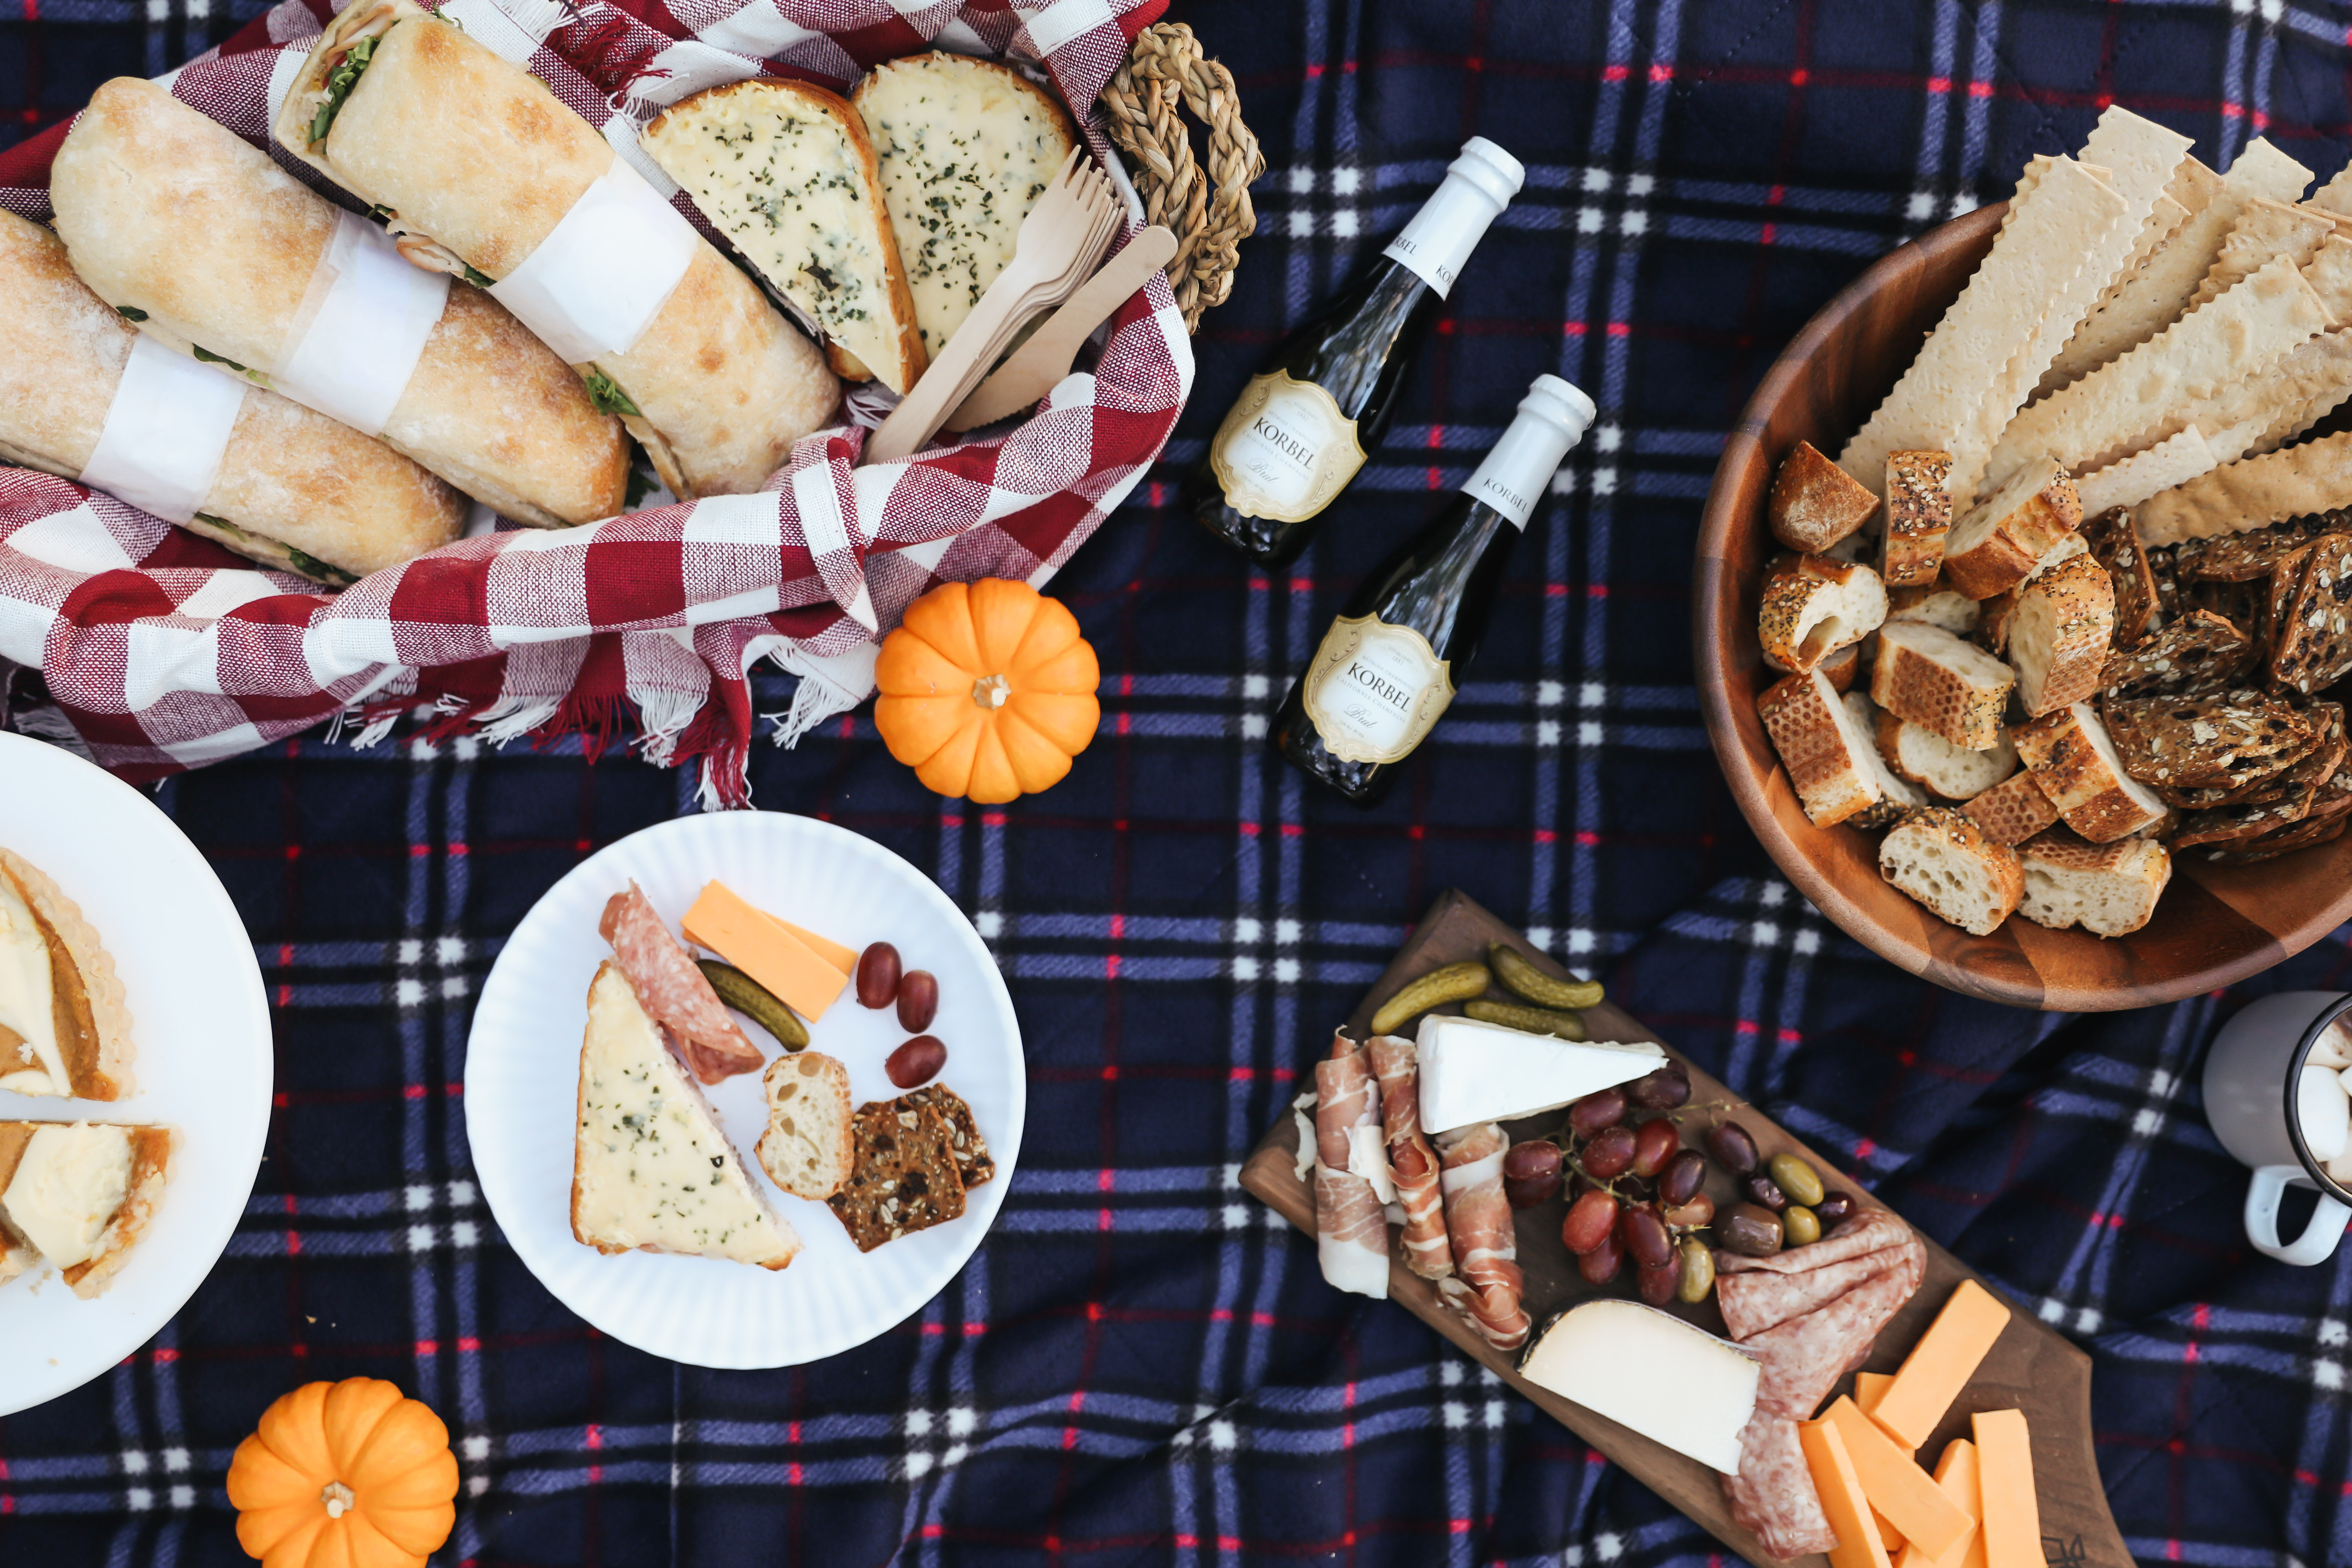 A Friendsgiving Picnic with Help from Uber.